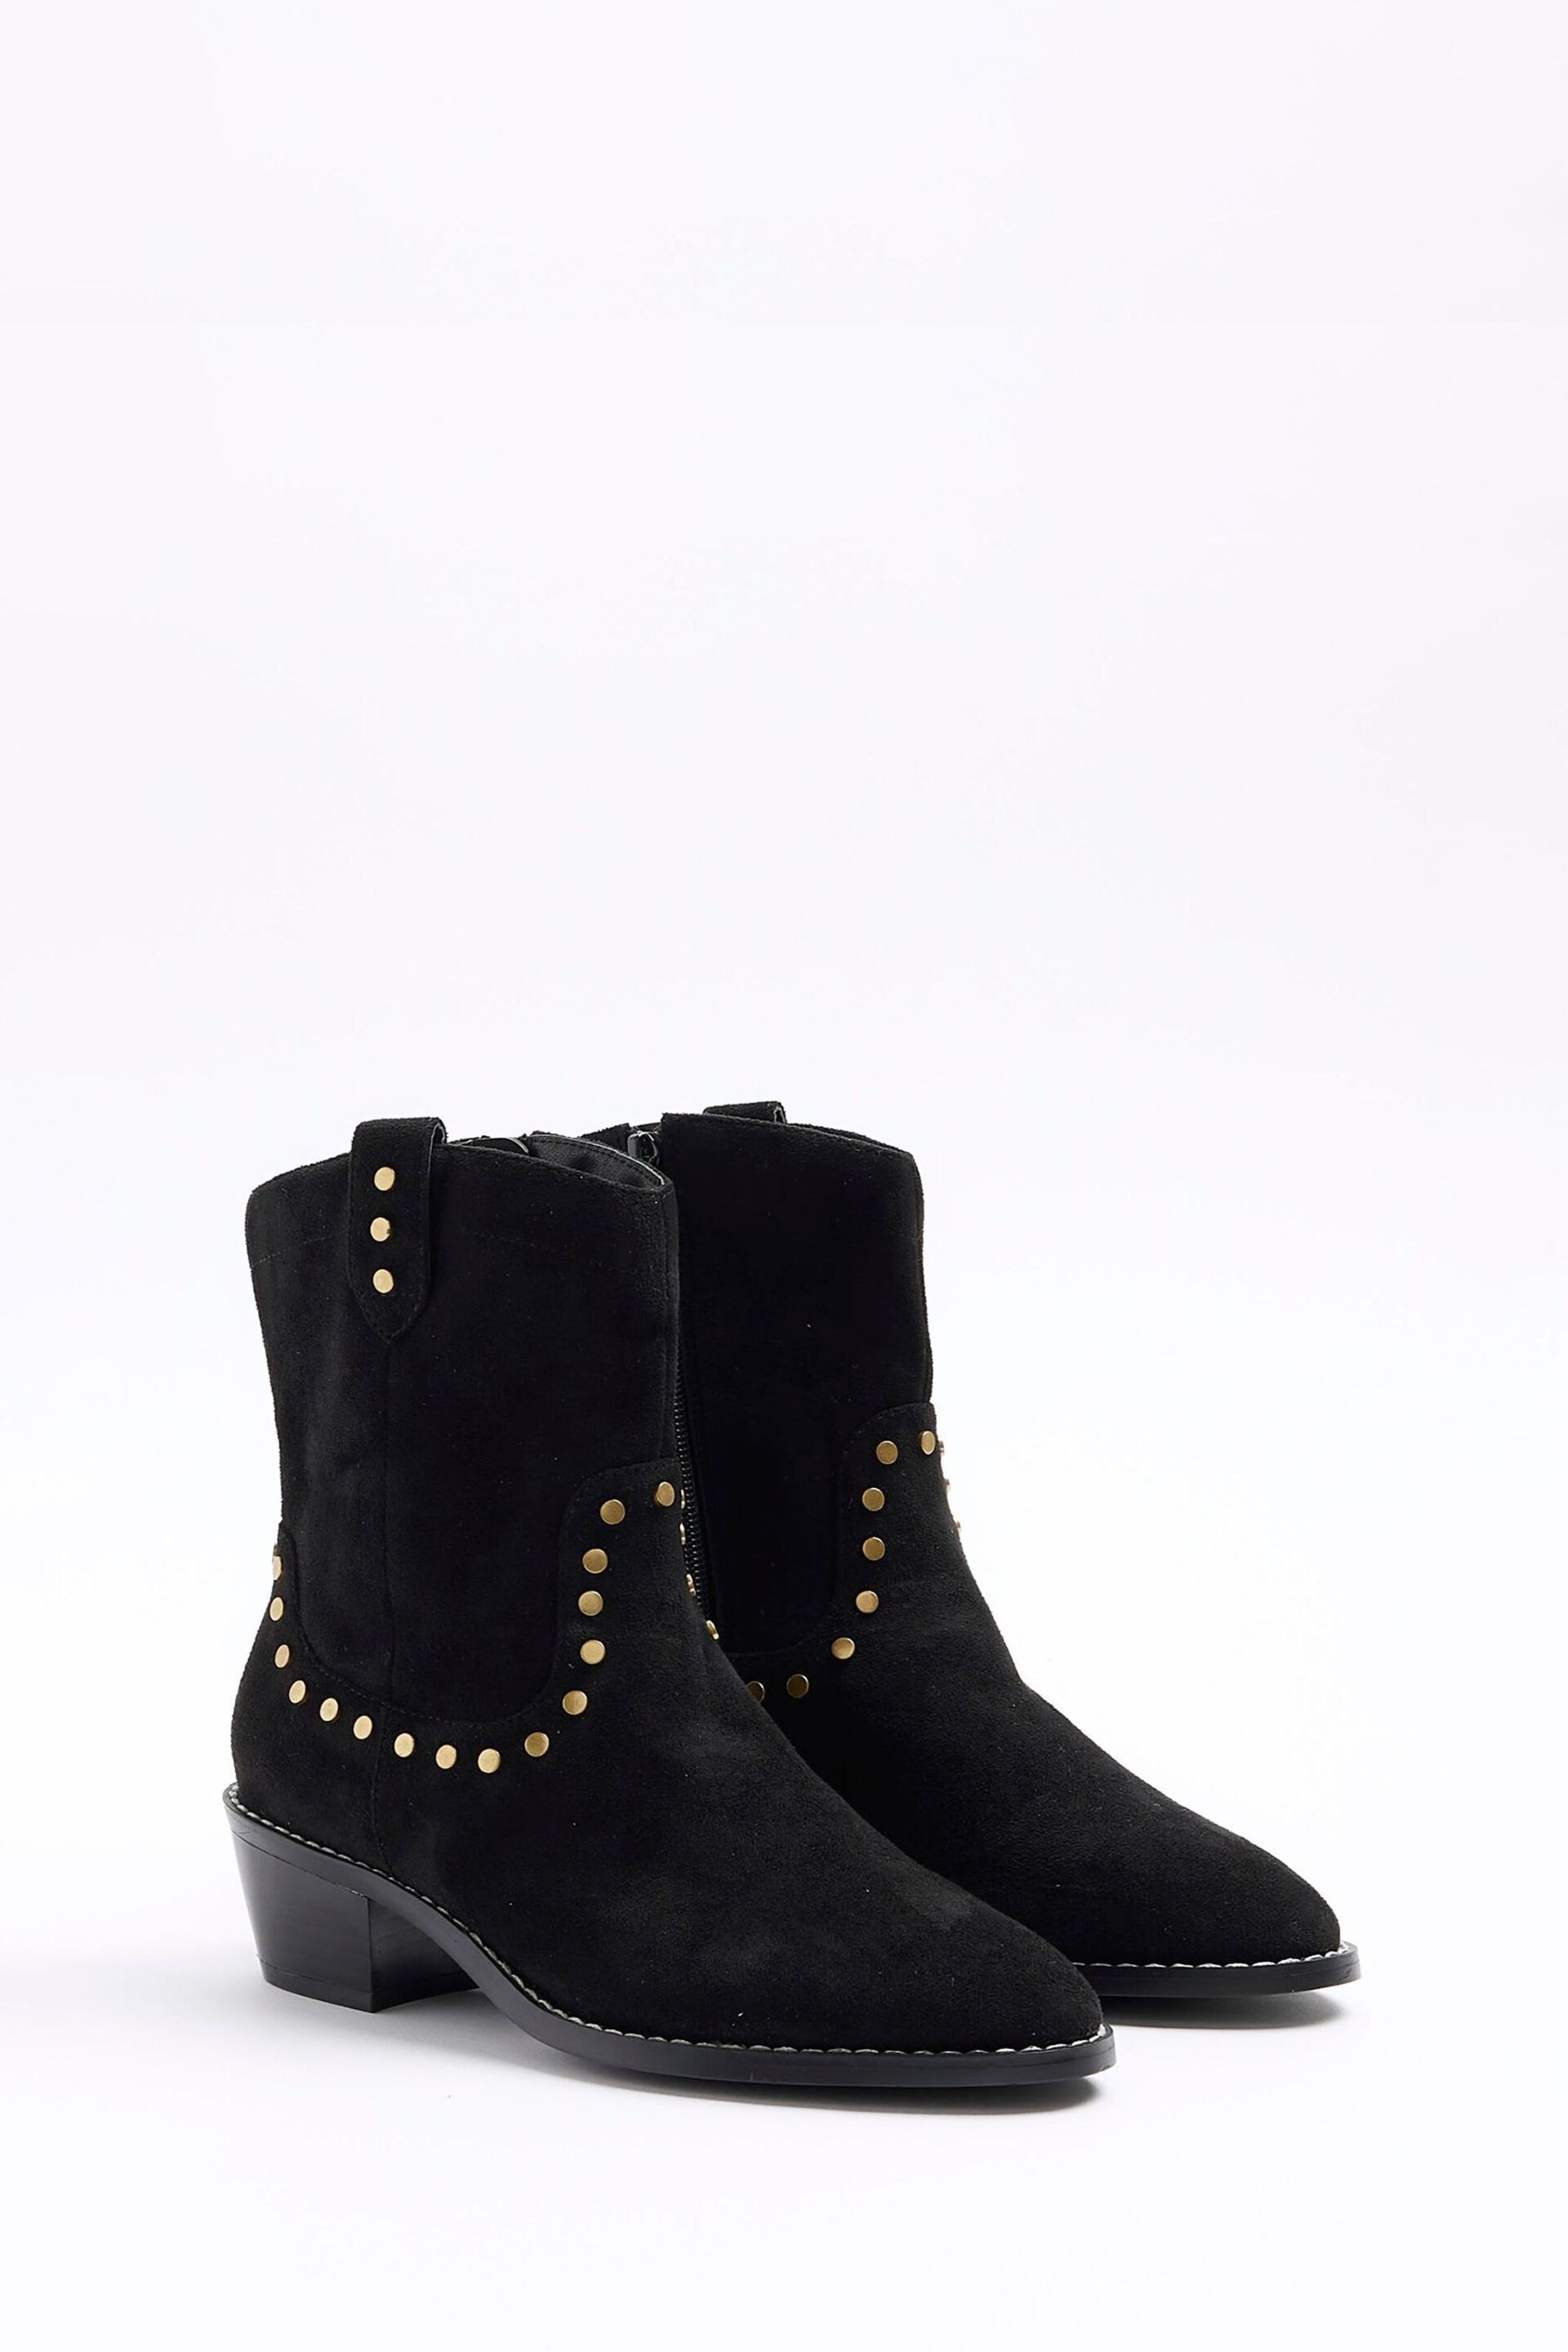 River Island Brown Studded Western Ankle Boots - Image 2 of 4